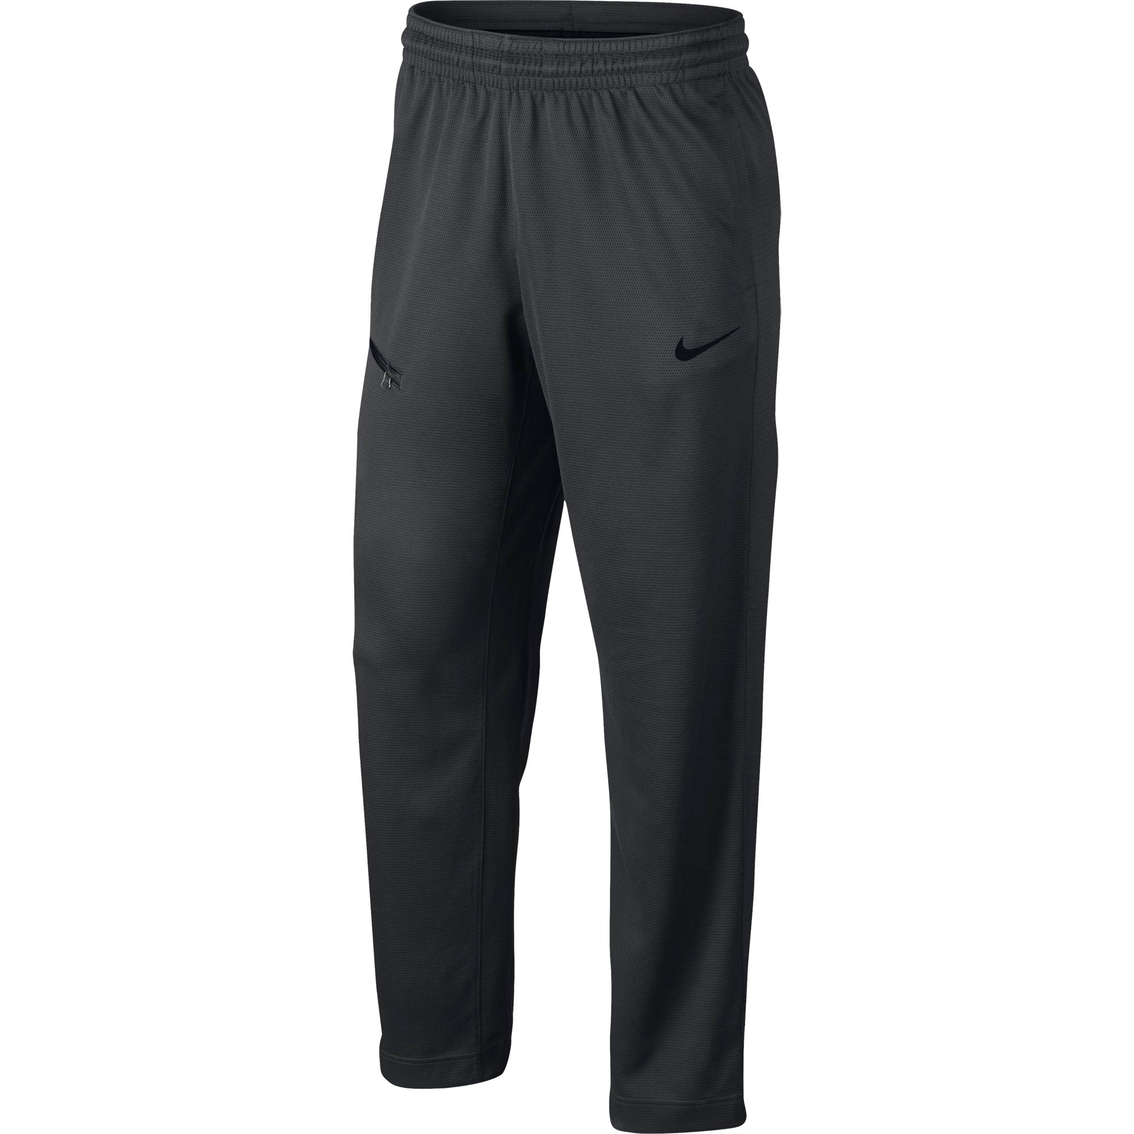 Nike Dry Rivalry Basketball Pants | Pants | Father's Day Shop | Shop ...